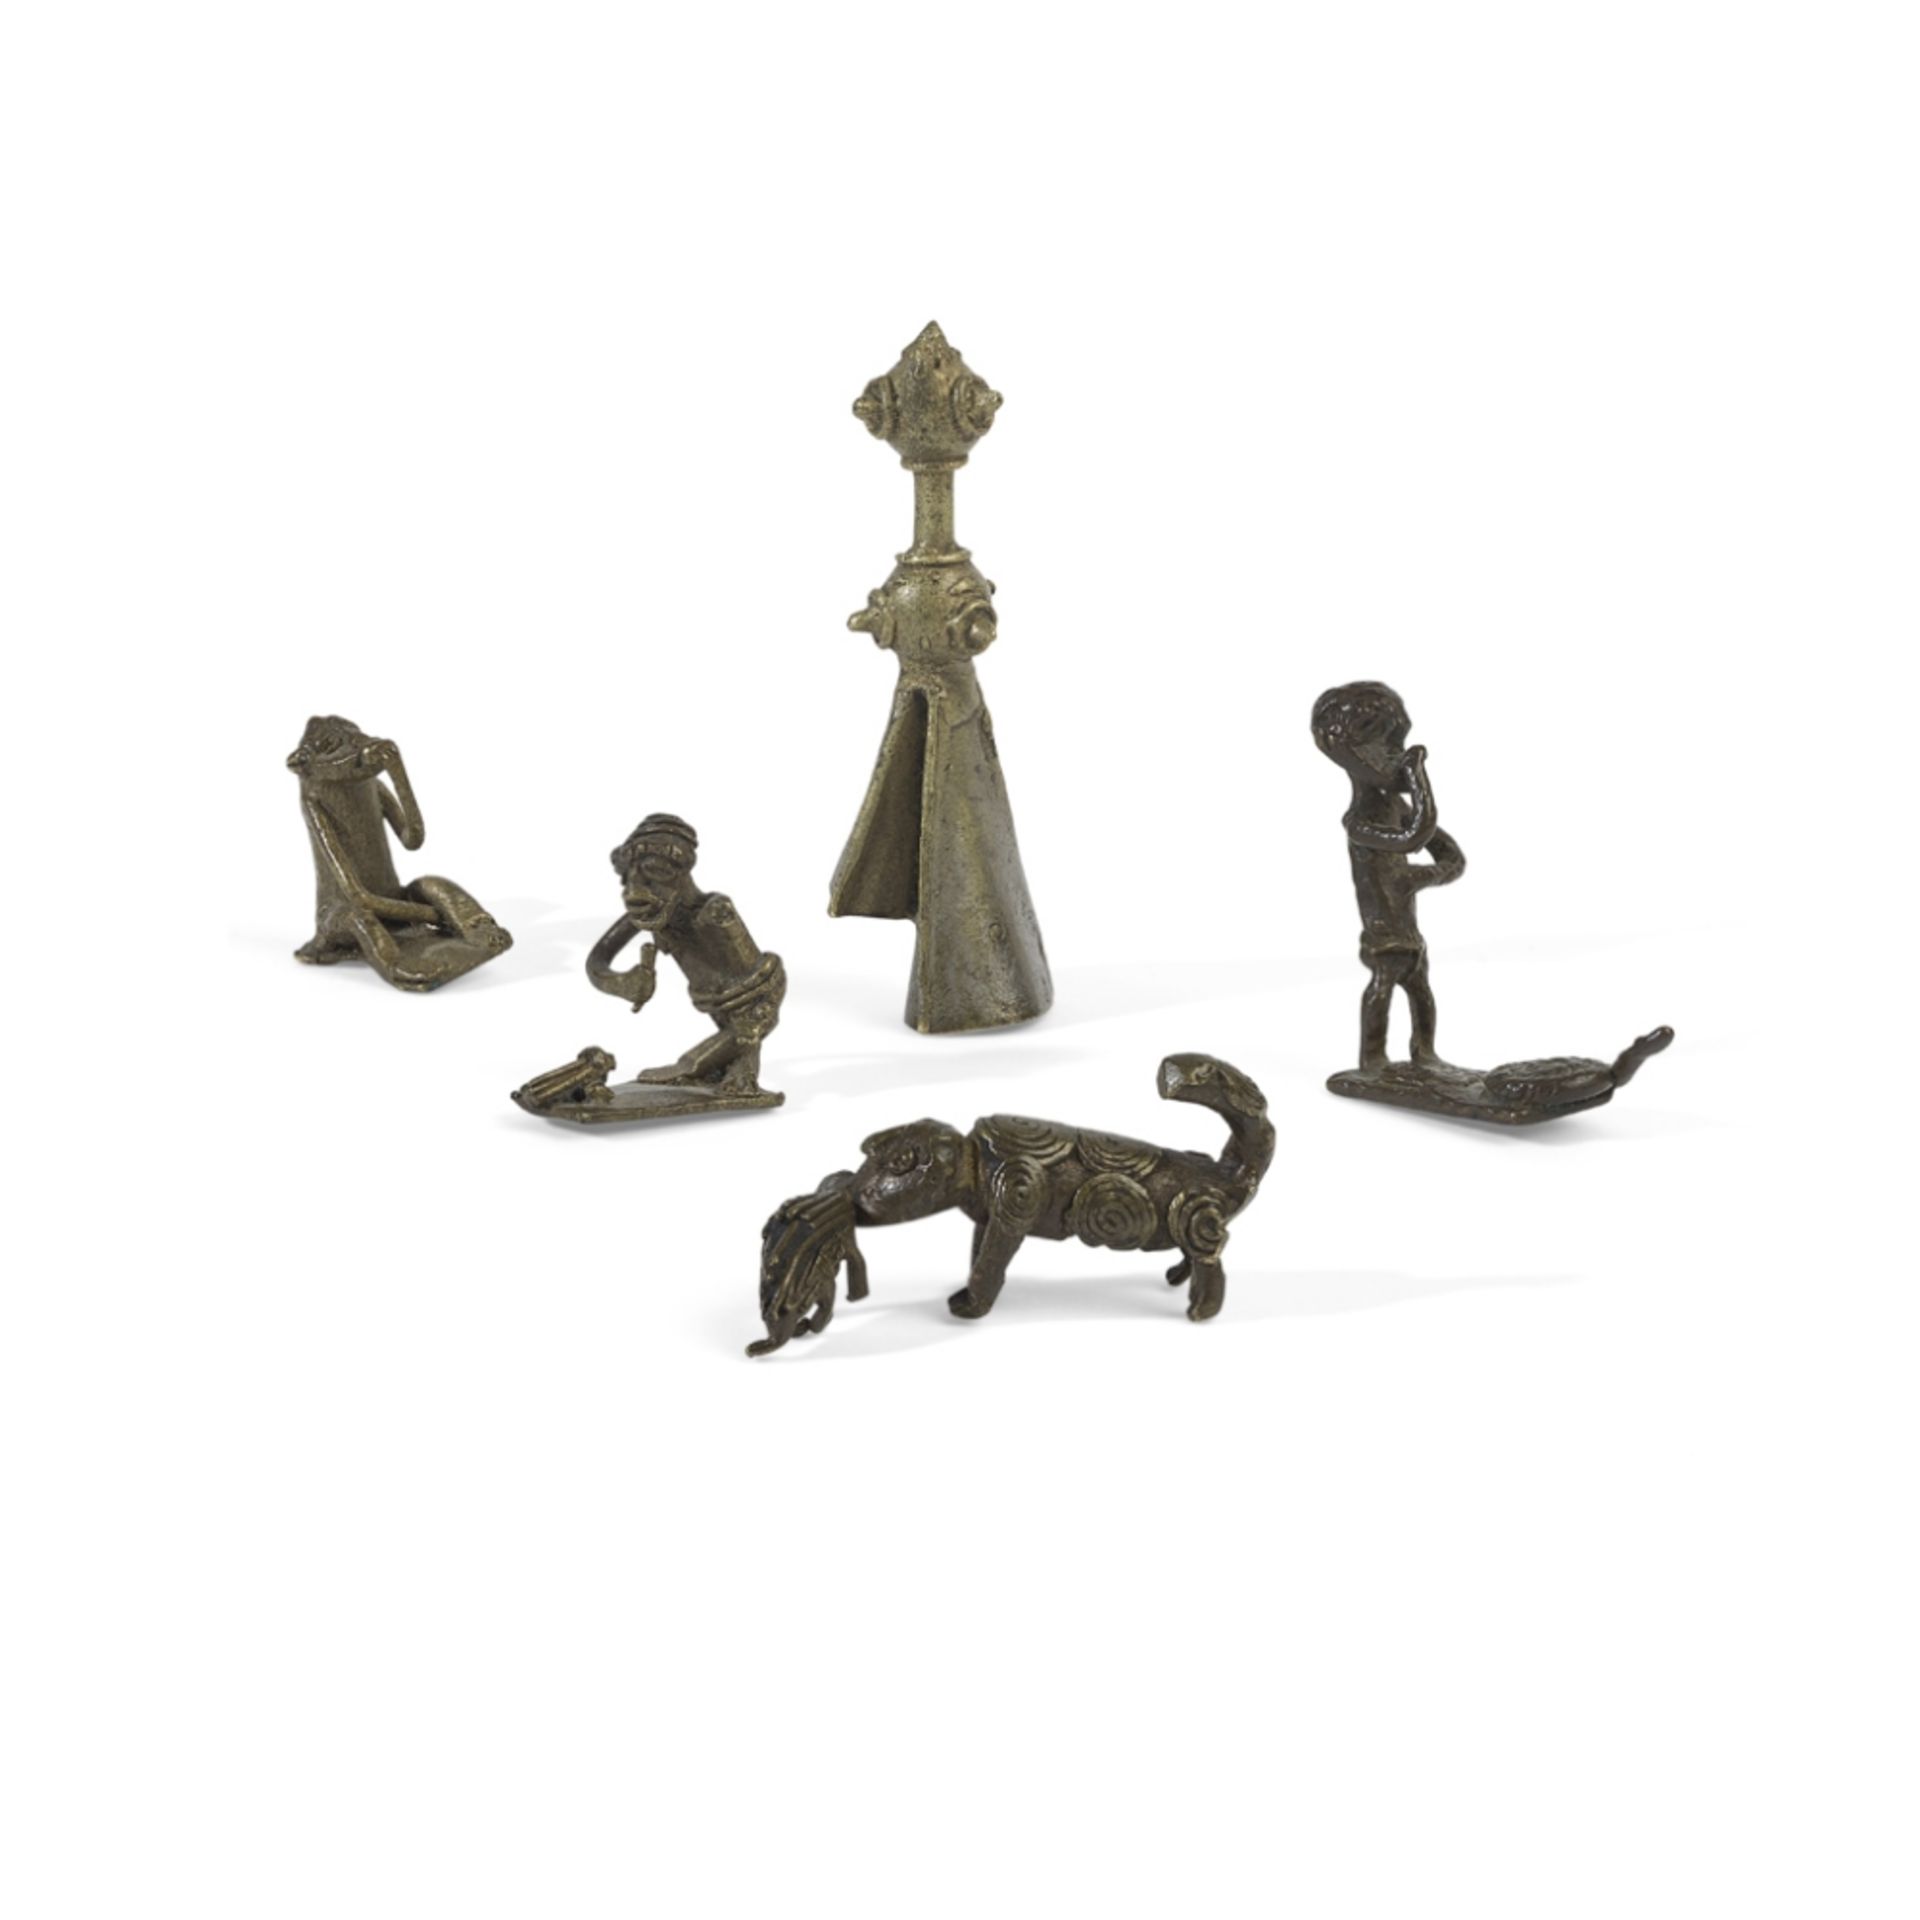 A COLLECTION OF ASHANTI GOLD WEIGHTSGHANA, 19TH - EARLY 20TH CENTURY cast bronze, each depicting